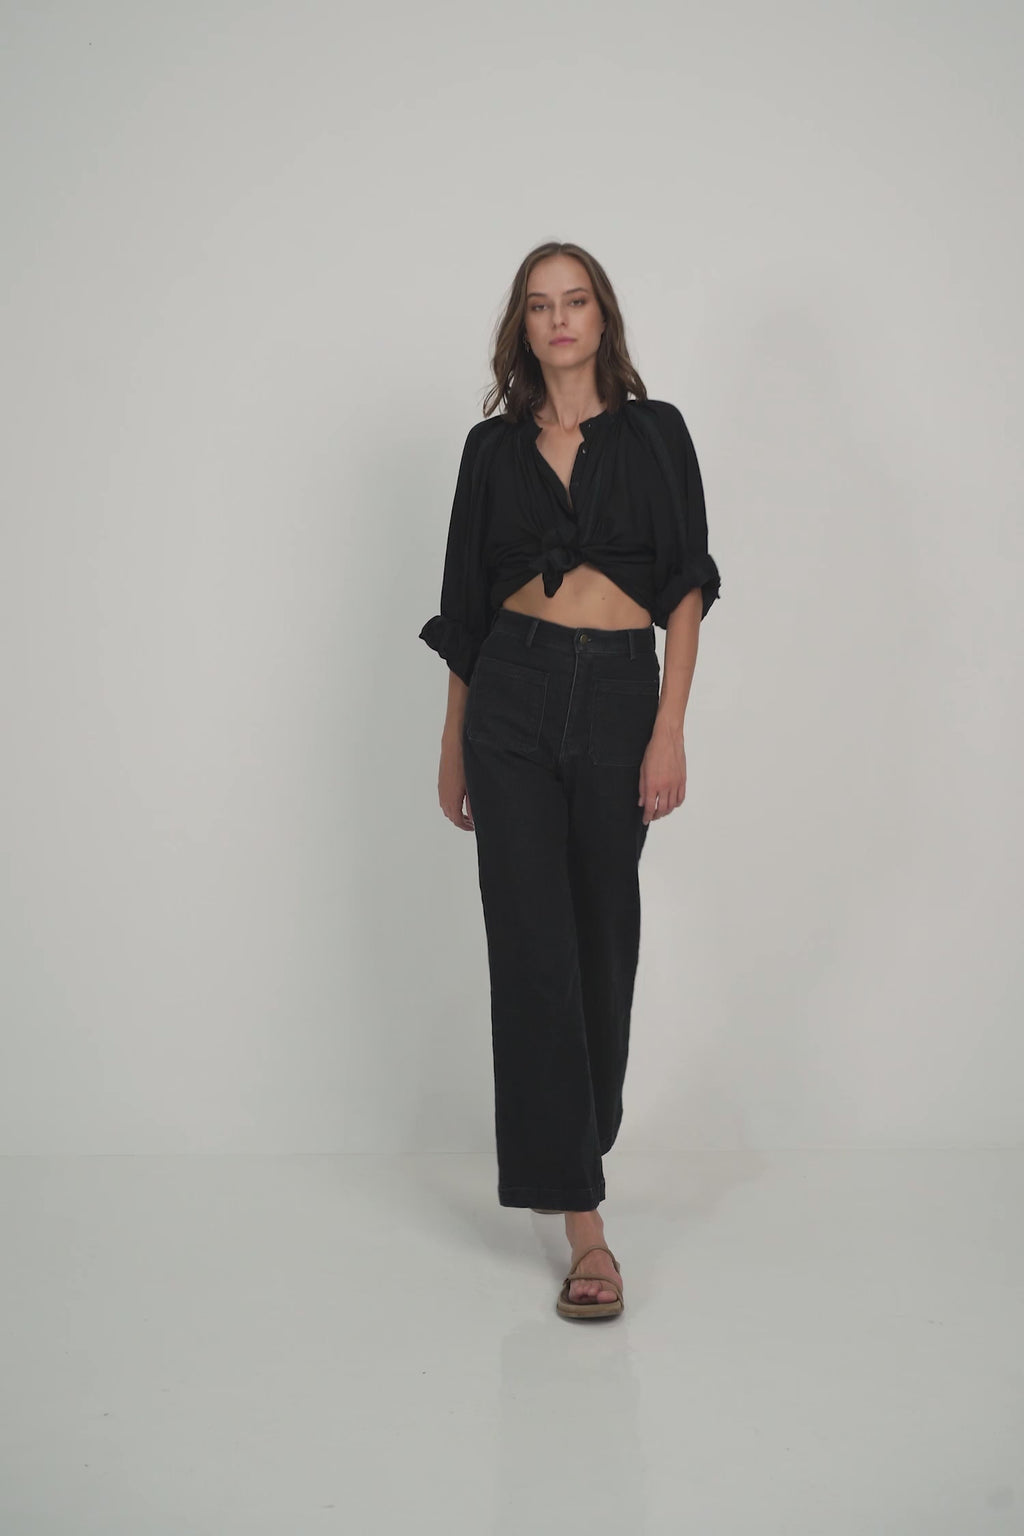 A Model Wearing a Loose Classic Black Summer Blouse